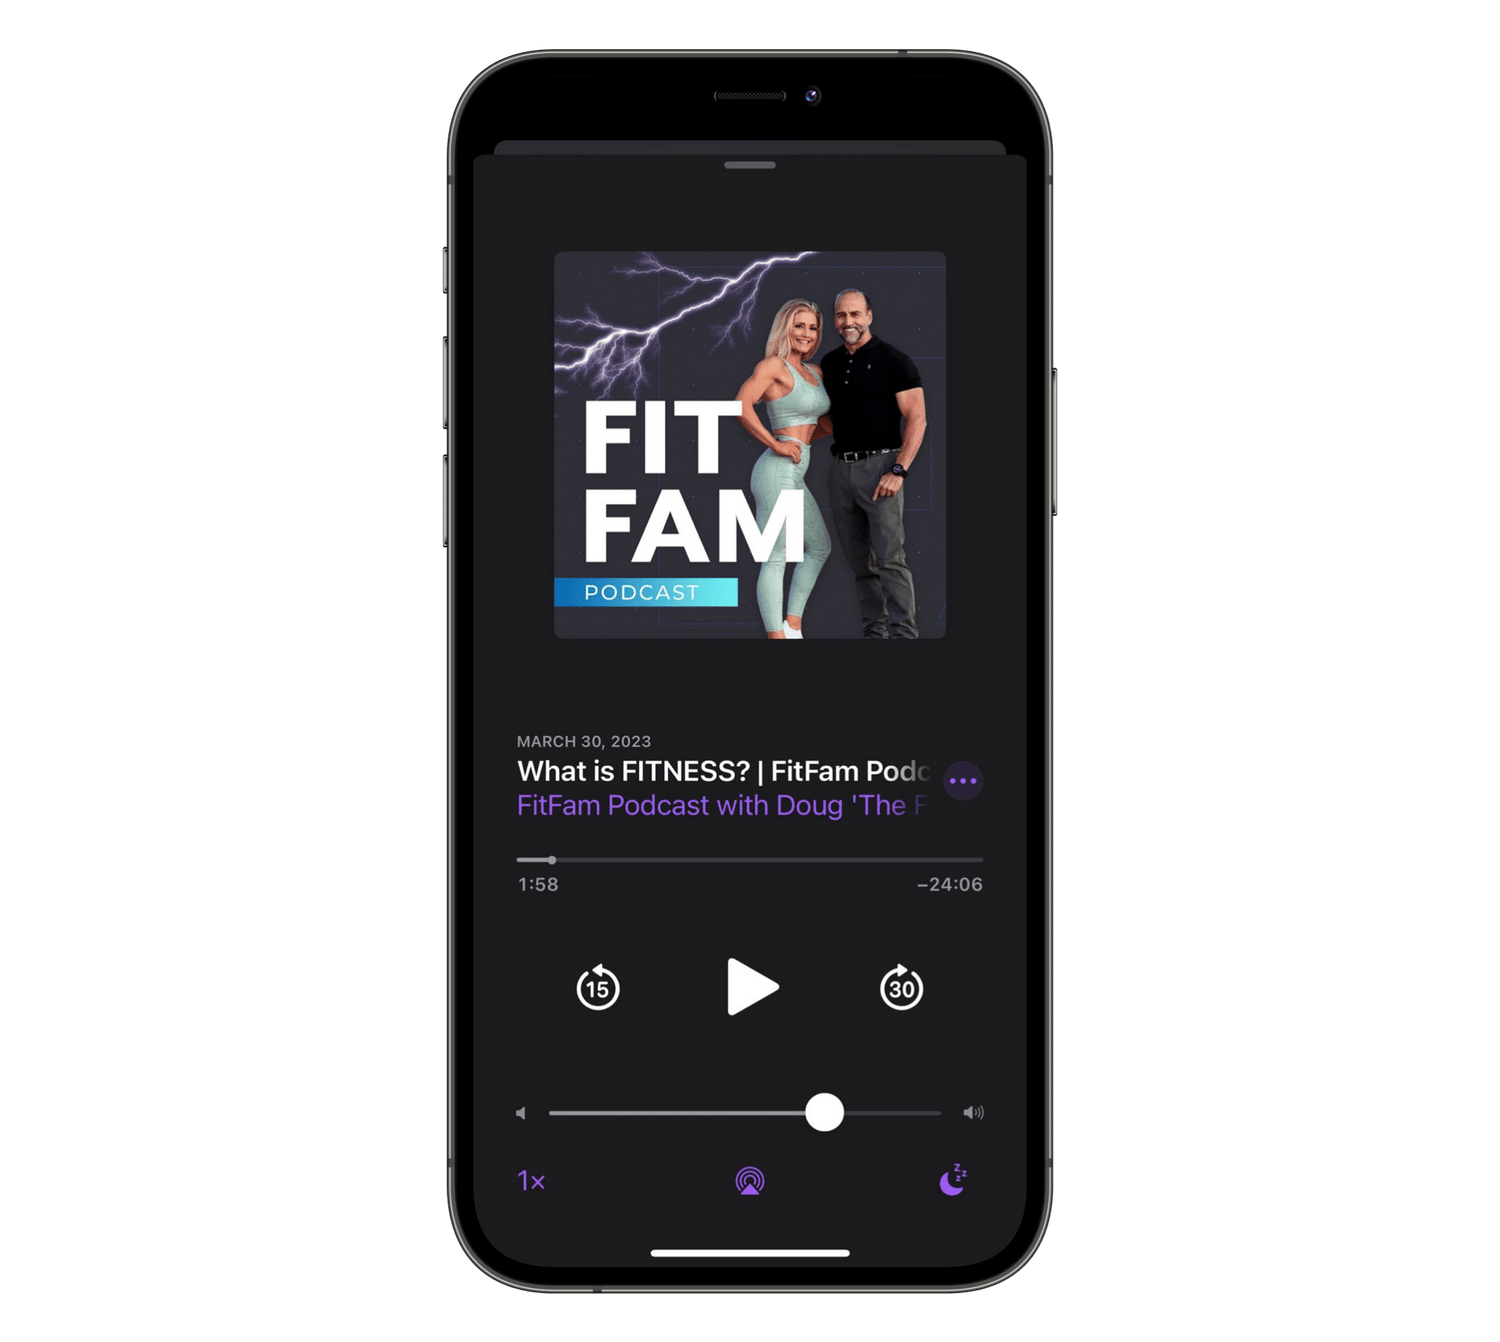 Image of a phone with the FitFam podcast playing.